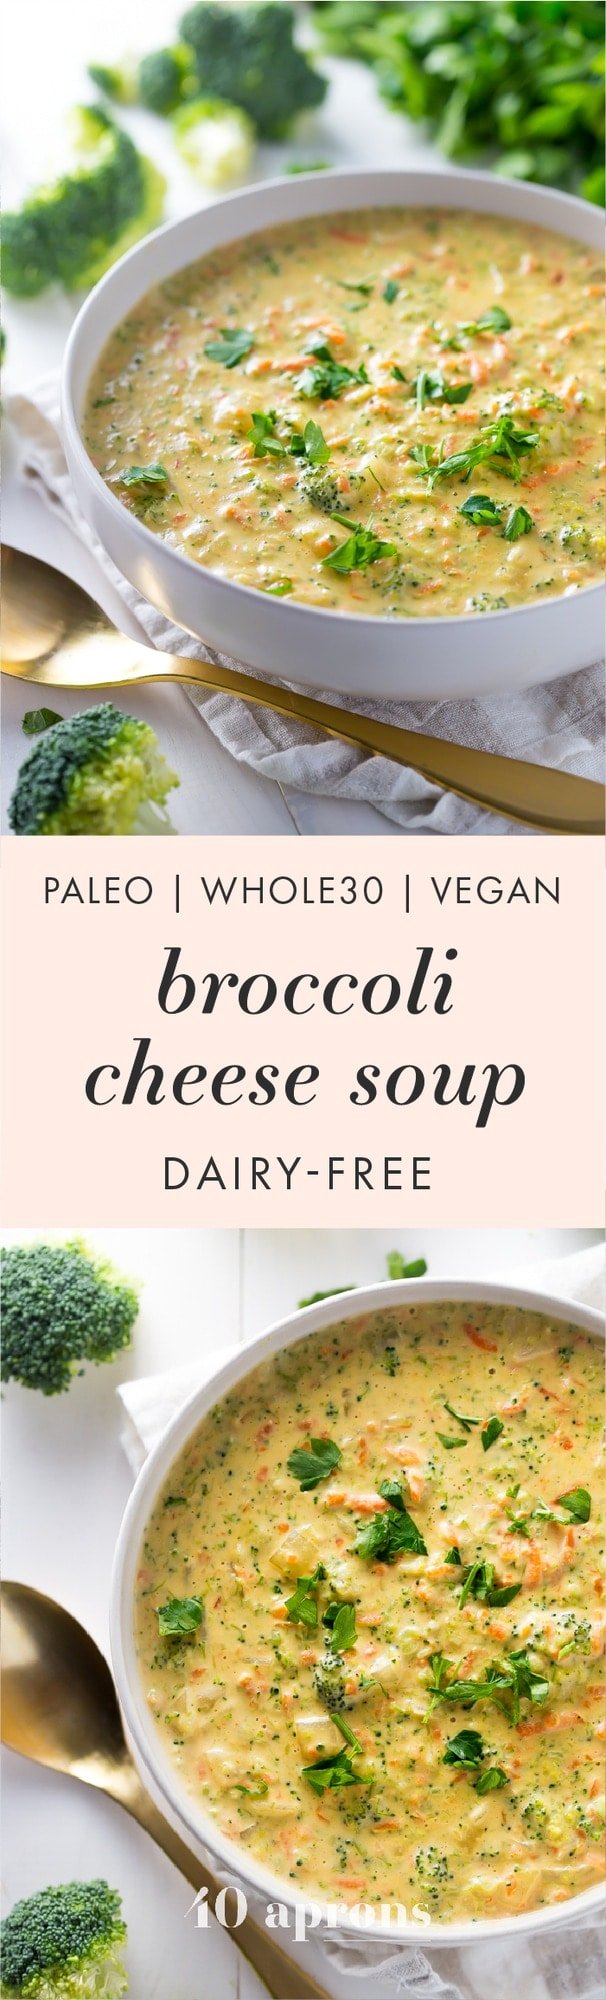 This paleo broccoli cheese soup is rich and creamy, easy to make, and a perfect paleo fall recipe. Whole30 compliant and totally dairy-free, there's plenty of cheesy flavor with none of the lactose and no weird ingredients! You'll fall in love with this paleo broccoli cheese soup, and it'll definitely become one of your favorite paleo fall recipes. 